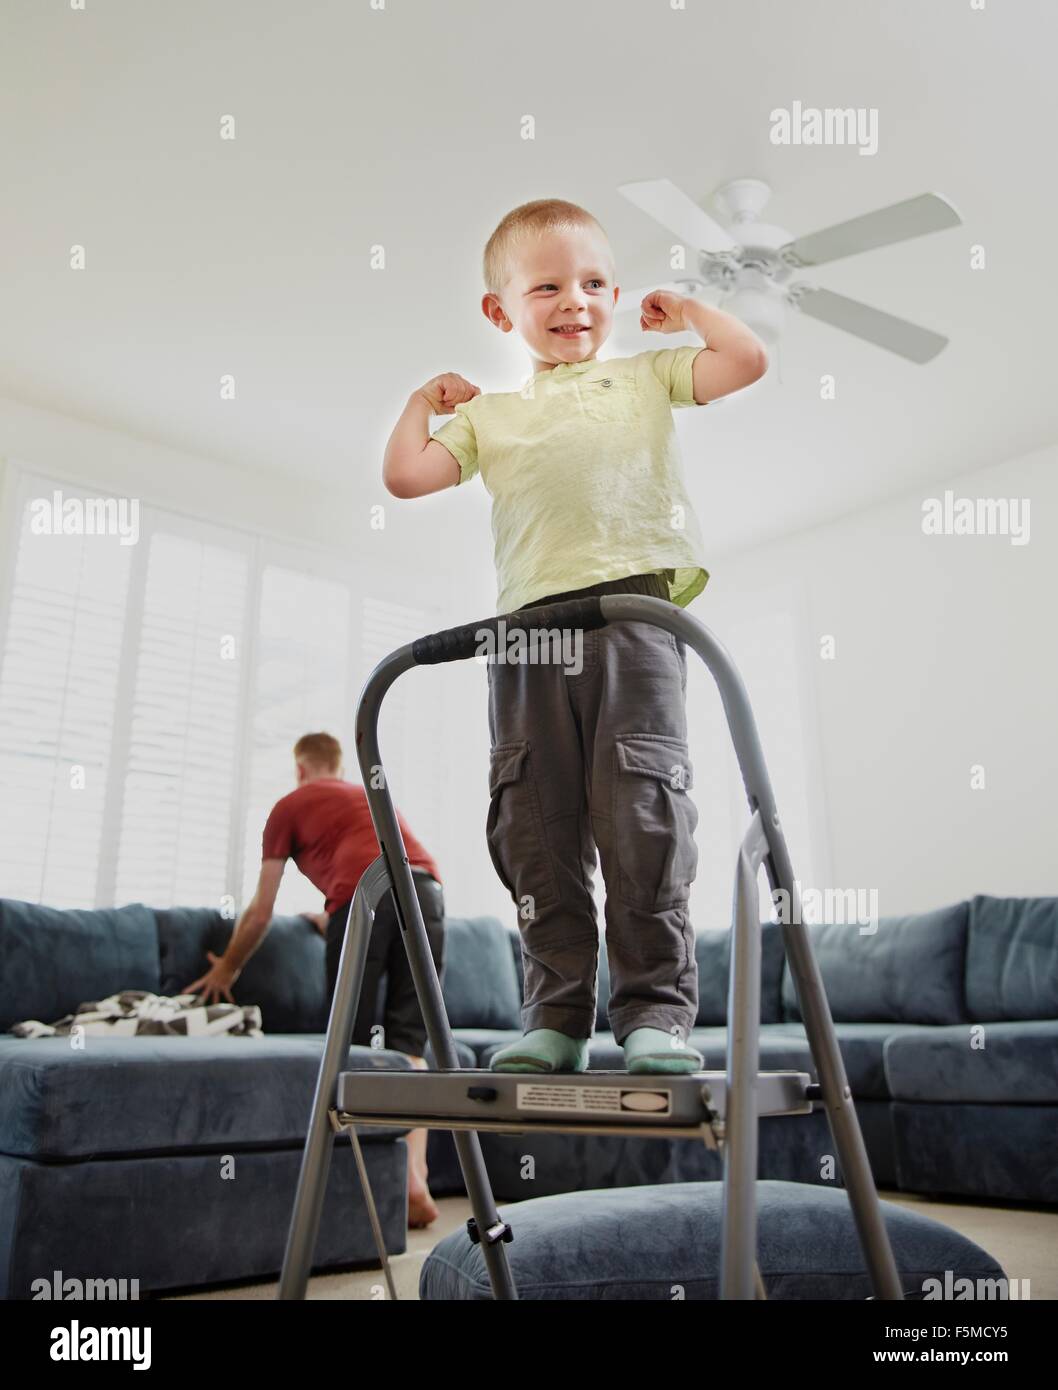 Boy flexing muscle in living room, father in background Stock Photo